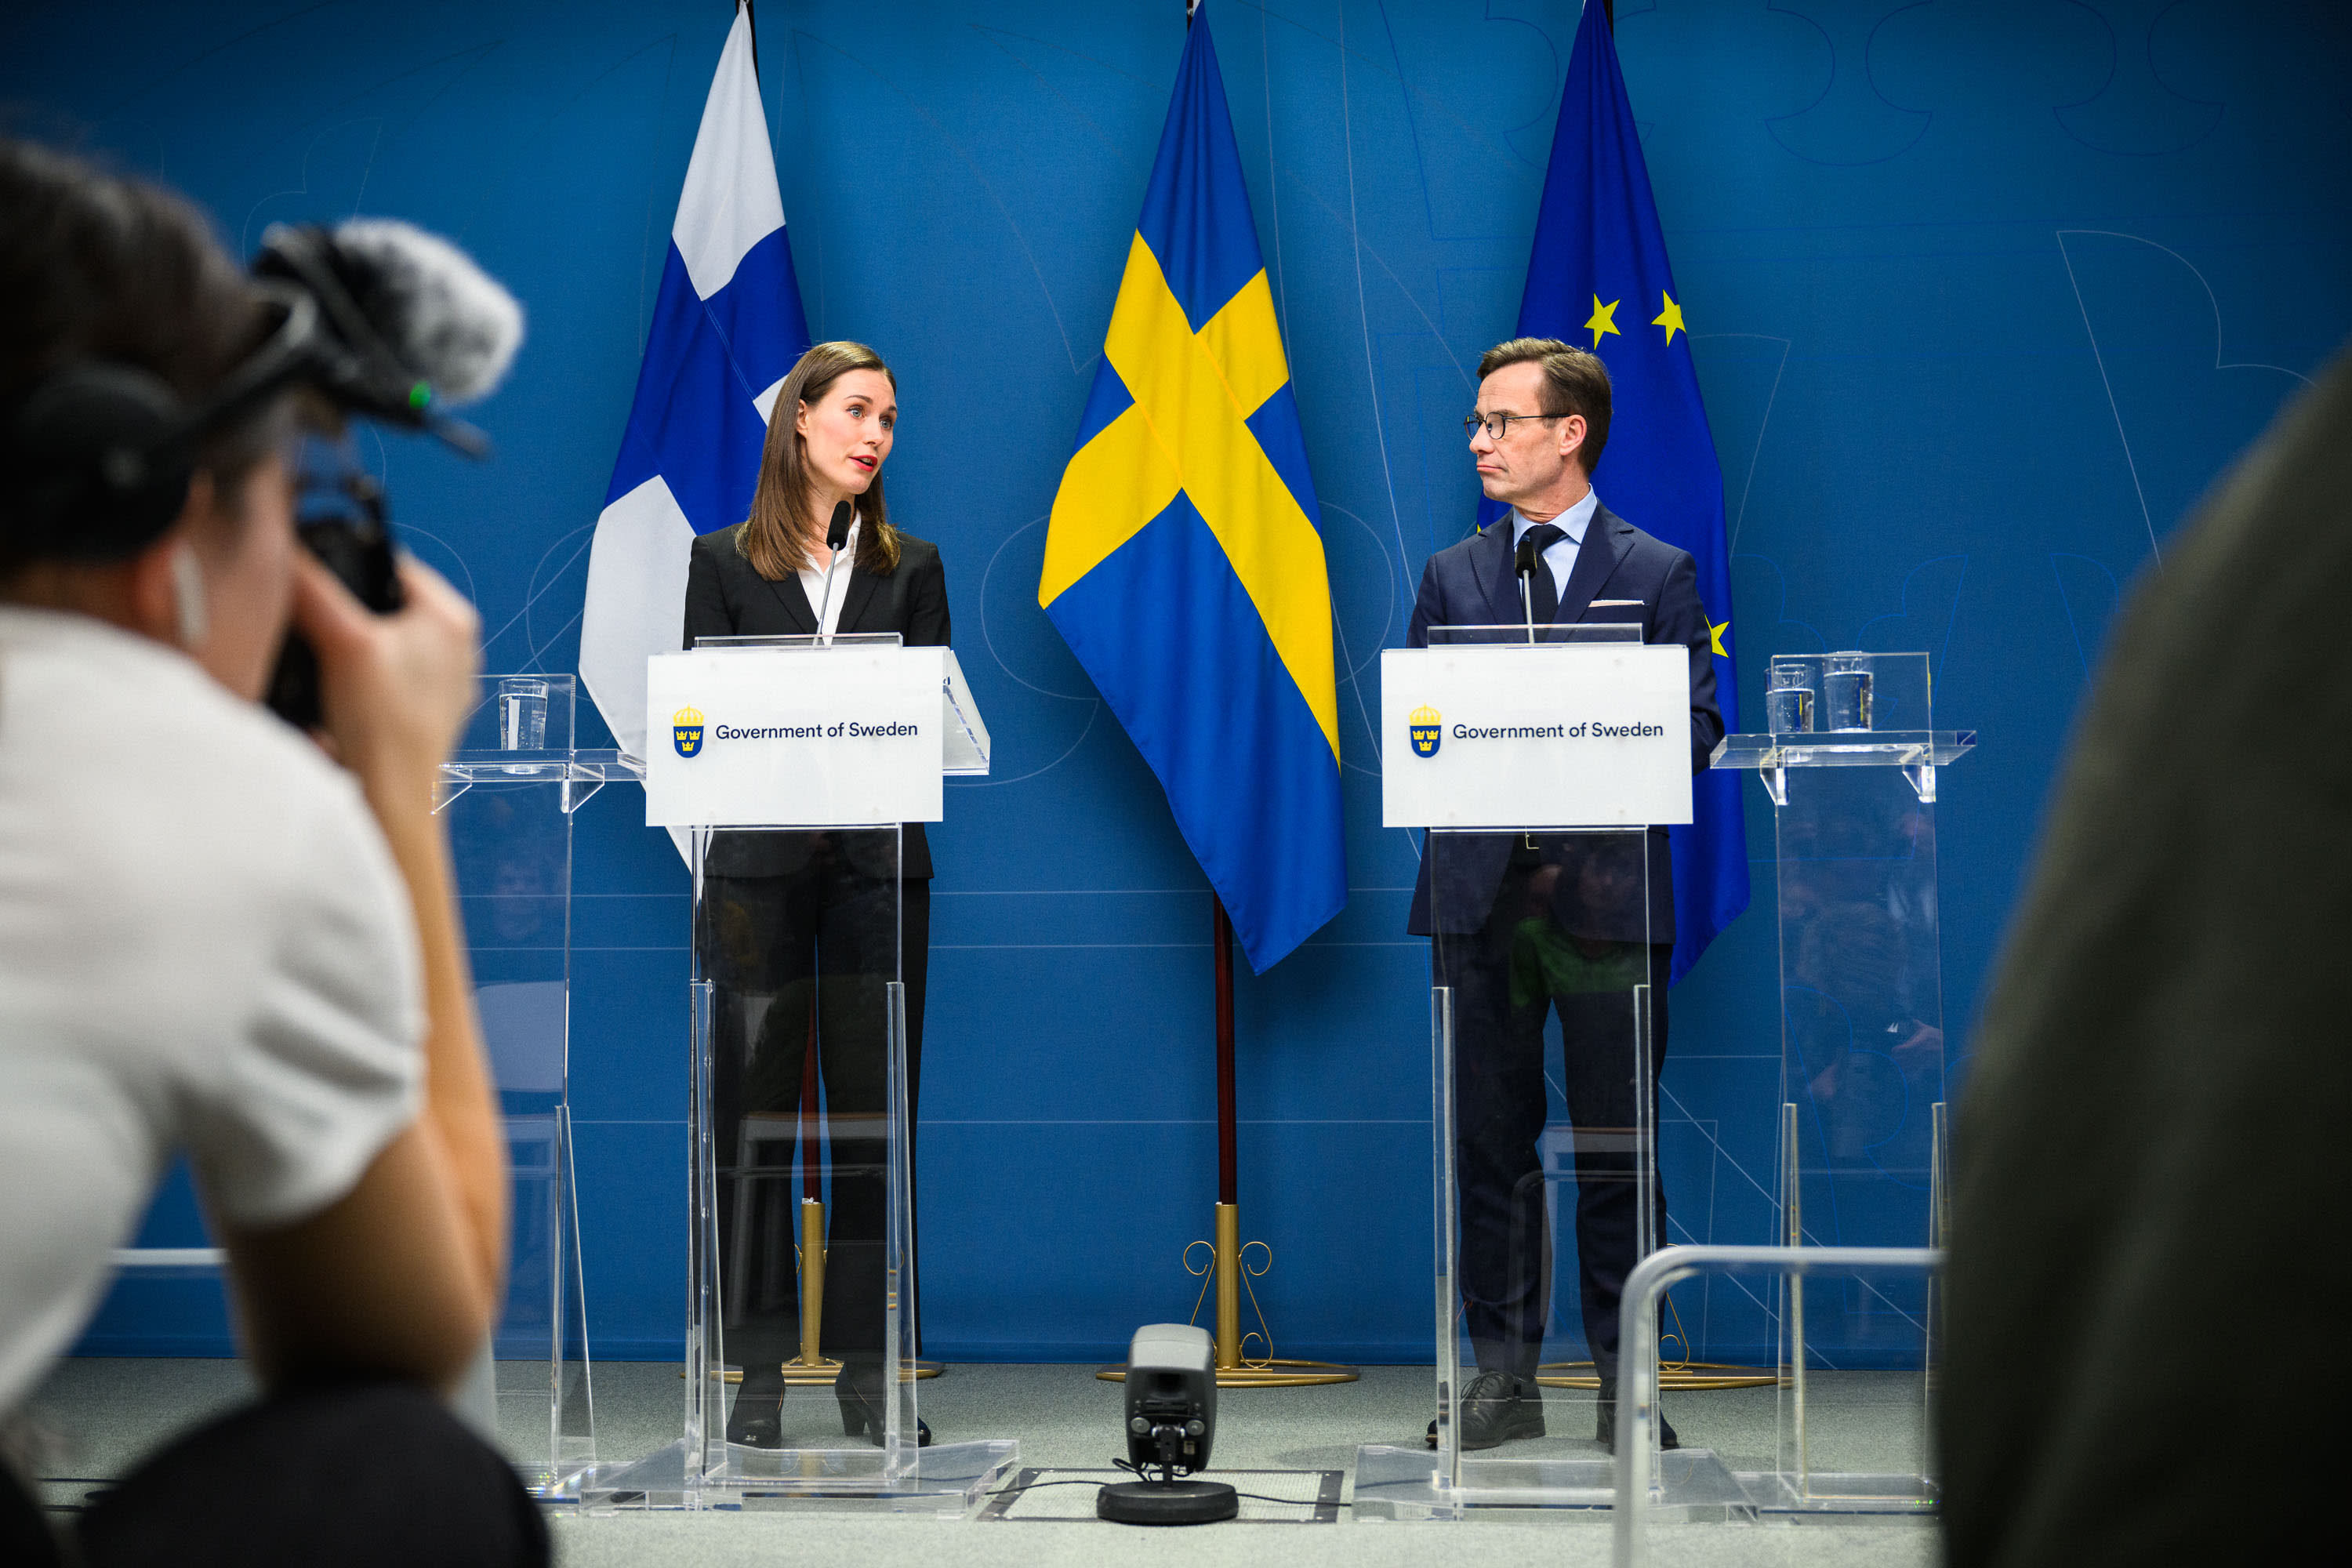 Yle’s survey: Most parliamentary parties are of the opinion that Finland could join NATO without Sweden